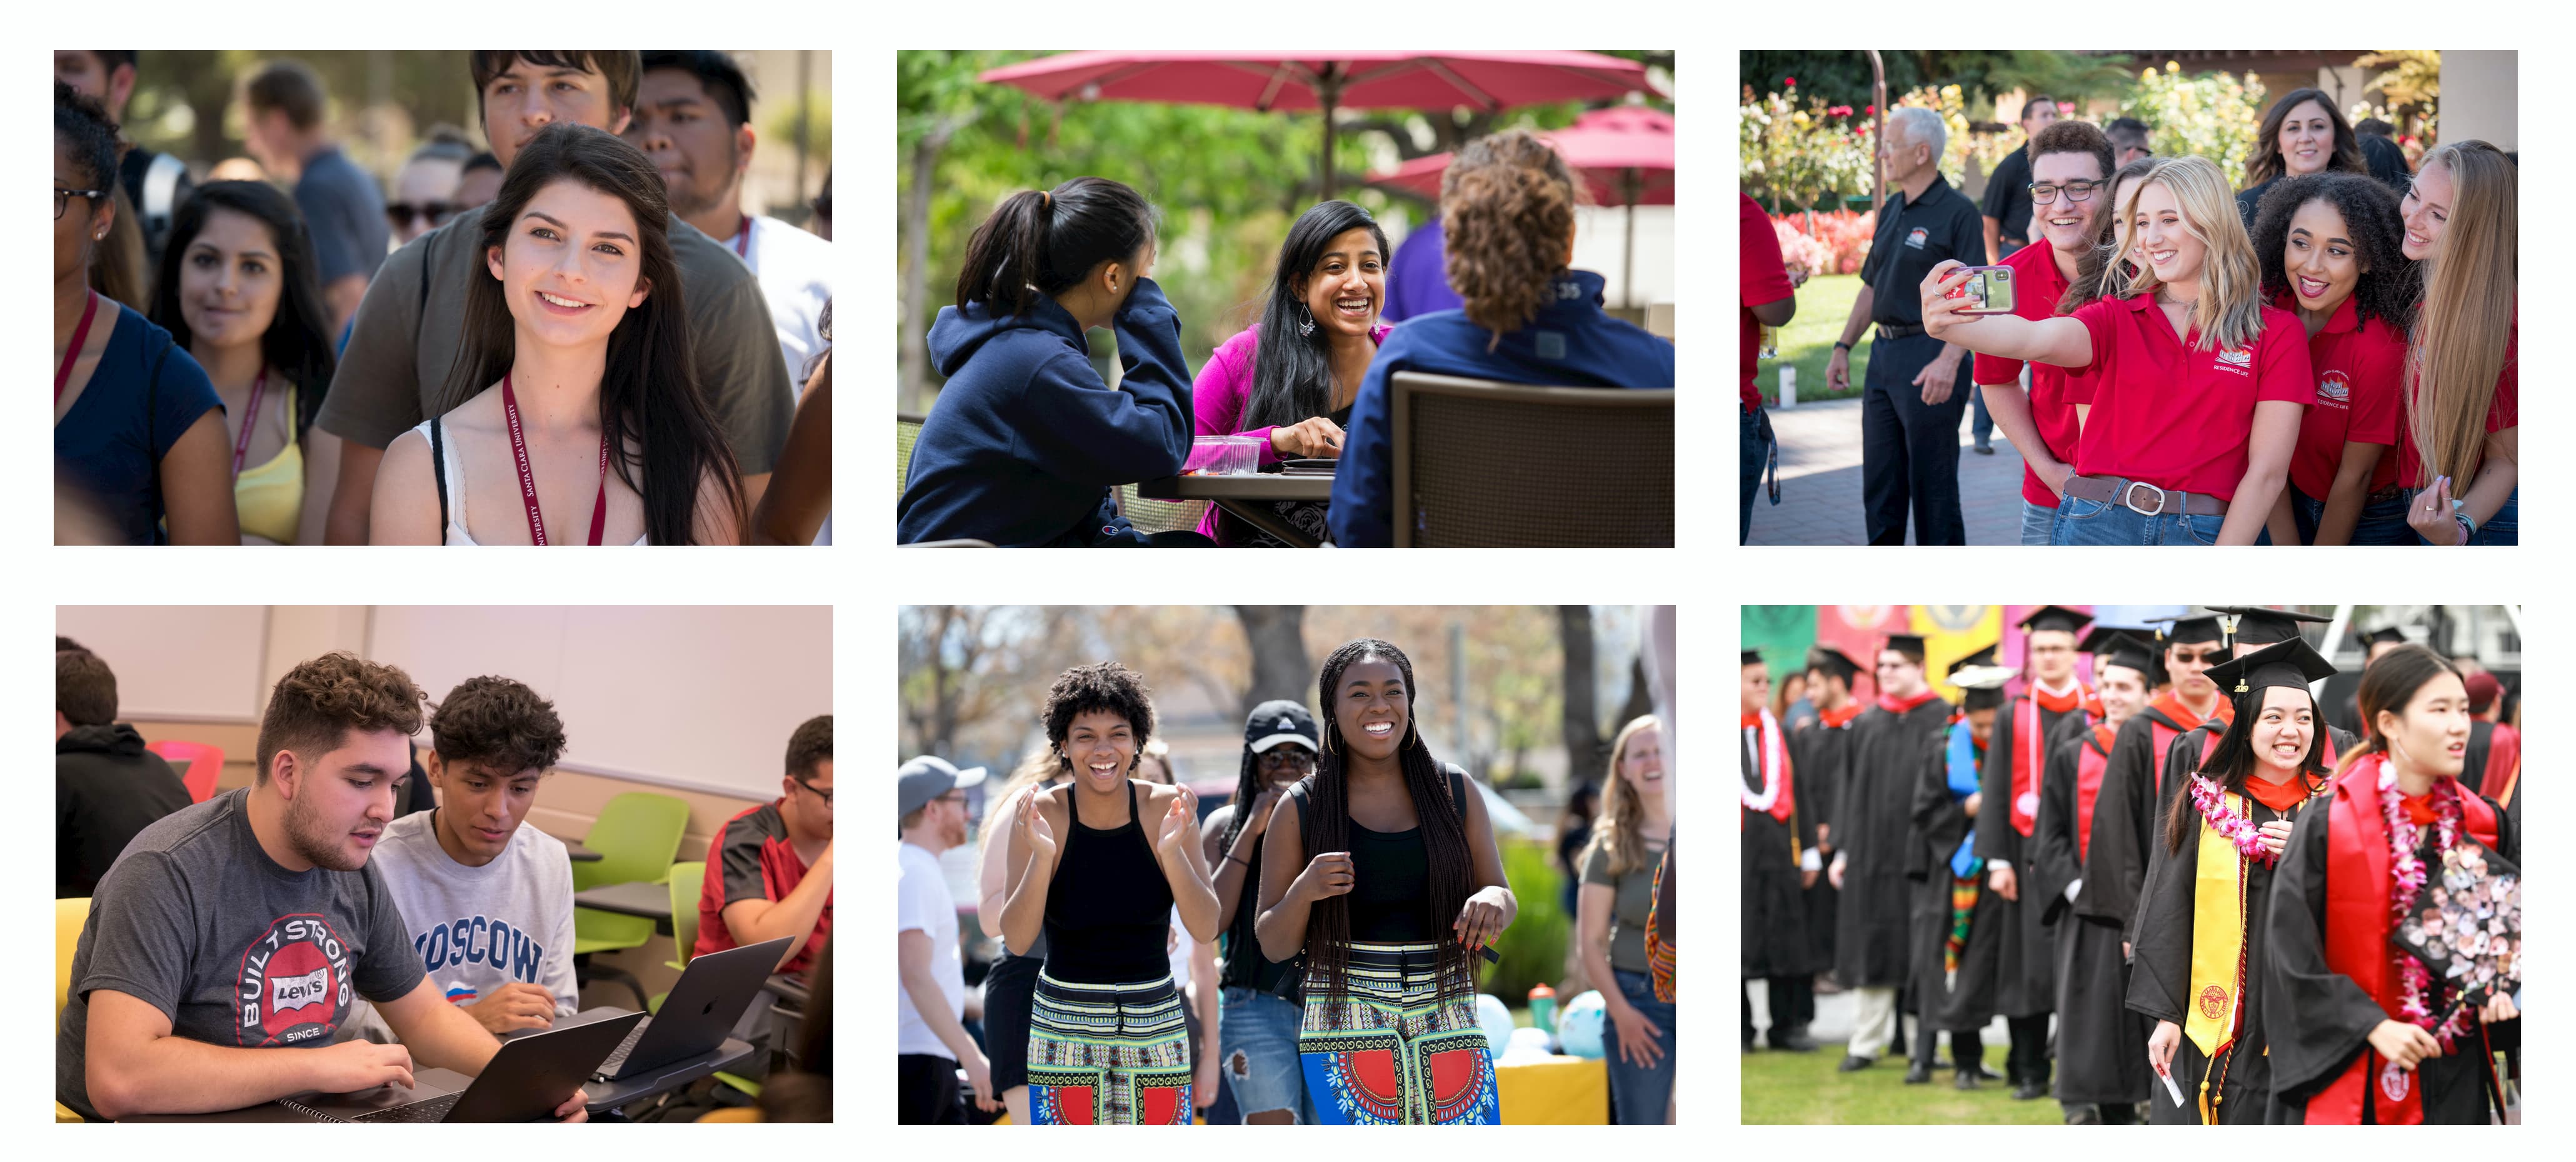 Collage of images depicting the life of a SCU student from orientation to graduation.